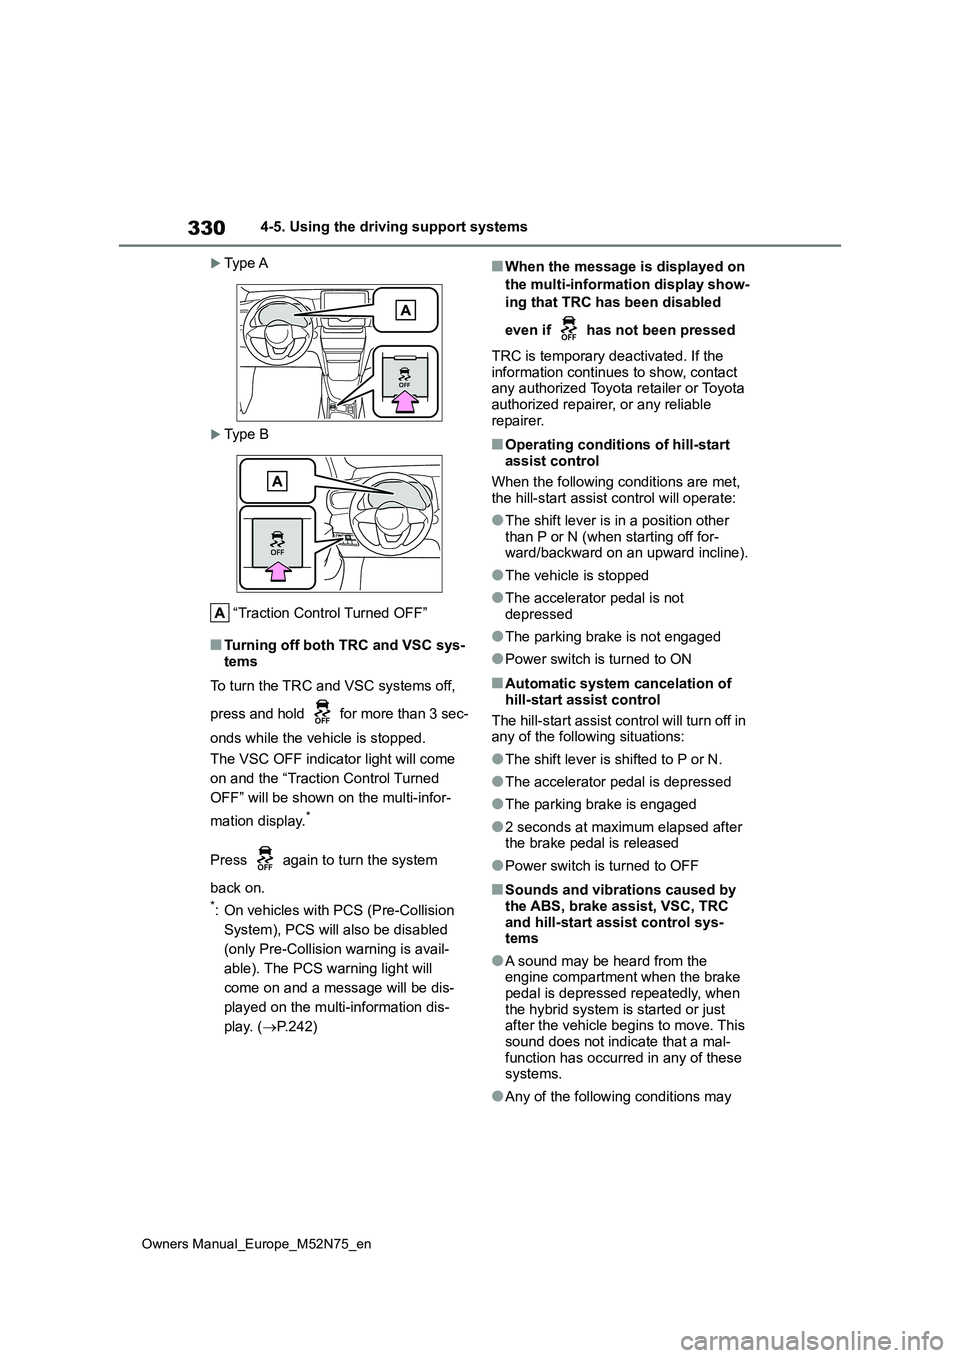 TOYOTA YARIS CROSS 2023  Owners Manual 330
Owners Manual_Europe_M52N75_en
4-5. Using the driving support systems
Typ e A
Typ e  B 
“Traction Control Turned OFF”
■Turning off both TRC and VSC sys- tems 
To turn the TRC and VSC s